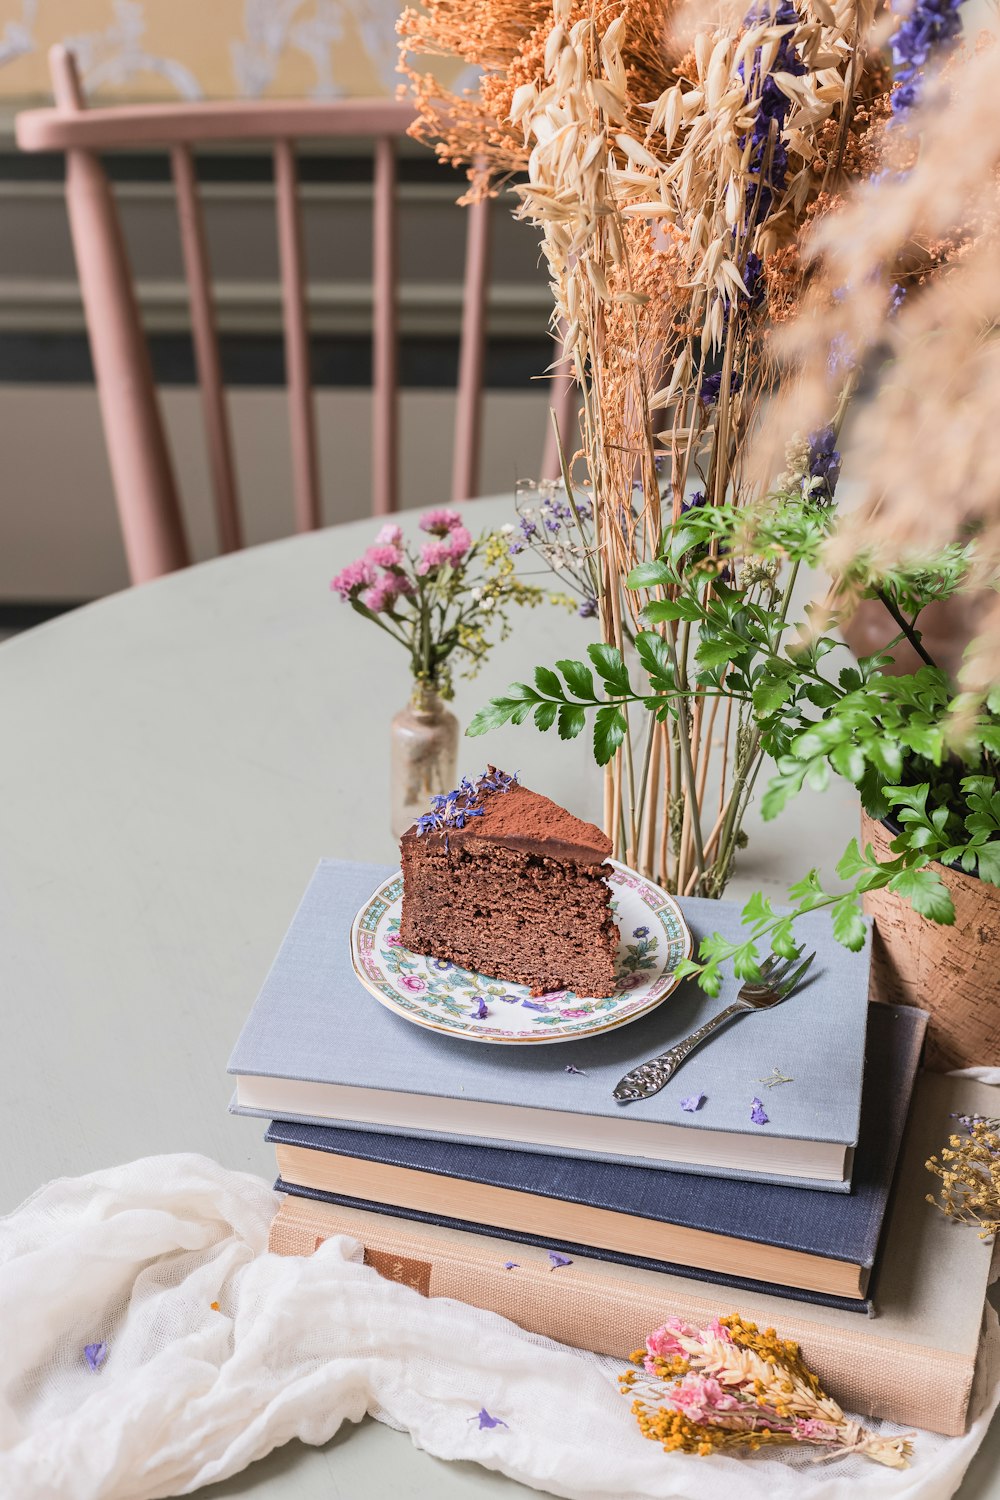 a table topped with a plate of cake and flowers